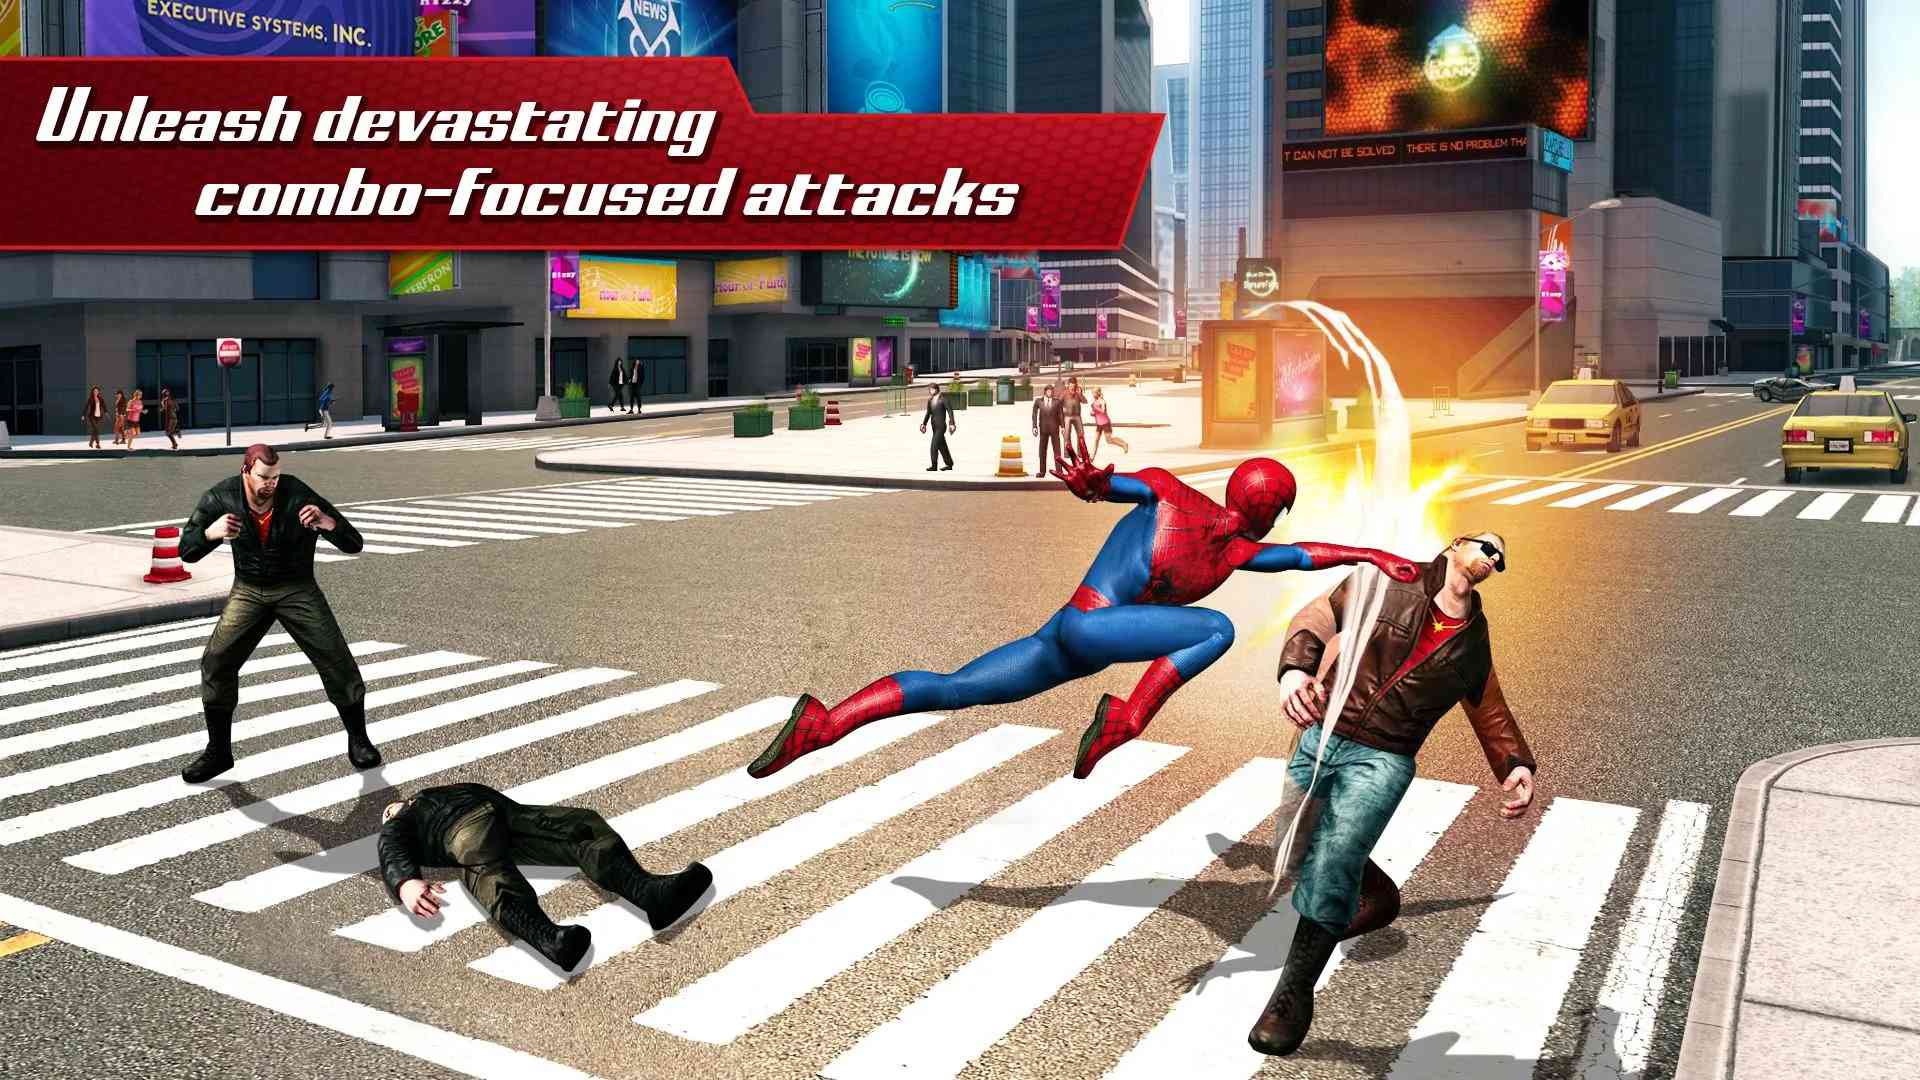 The Amazing Spider-Man 2(Unlimited Money)